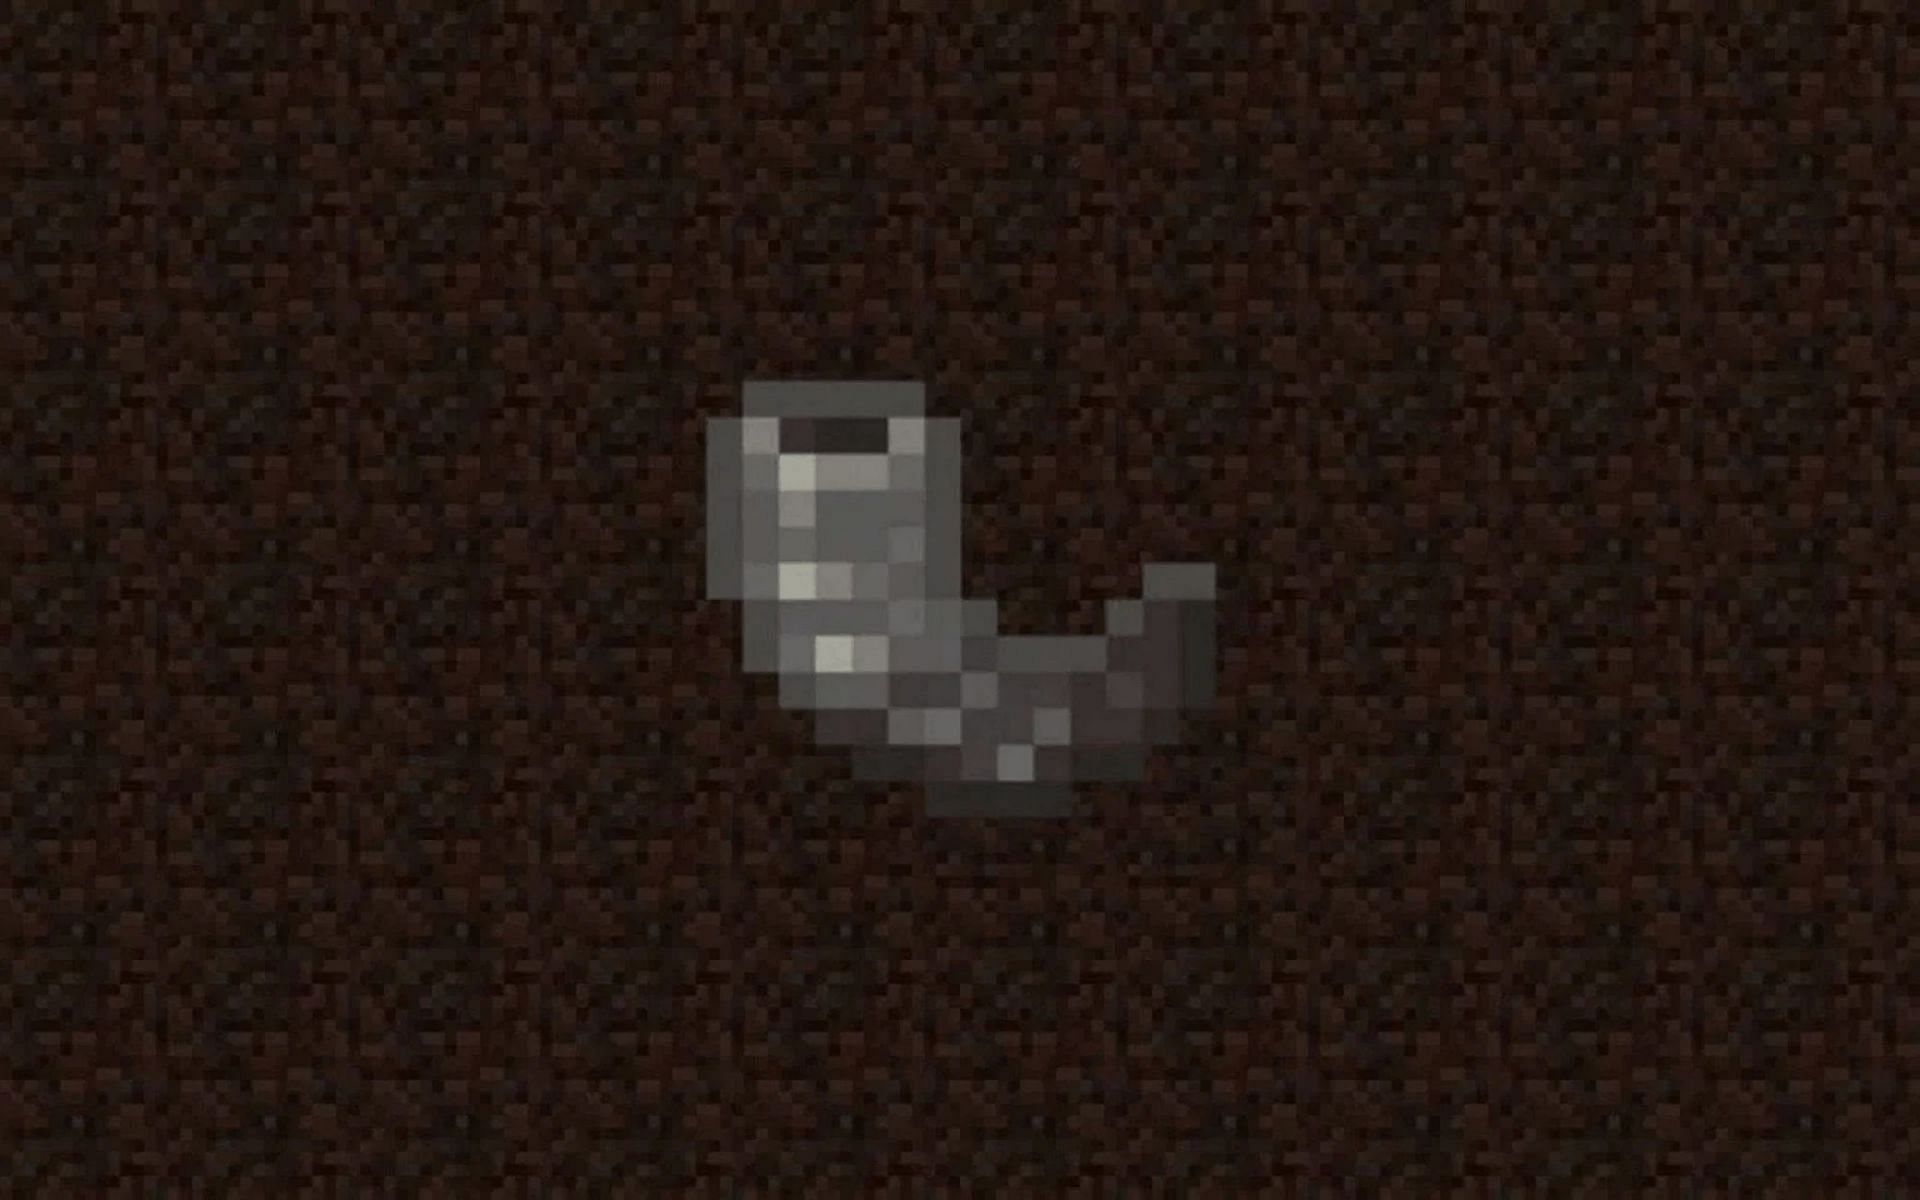 After phasing in and out of Minecraft lately, goat horns return in earnest (Image via Mojang)